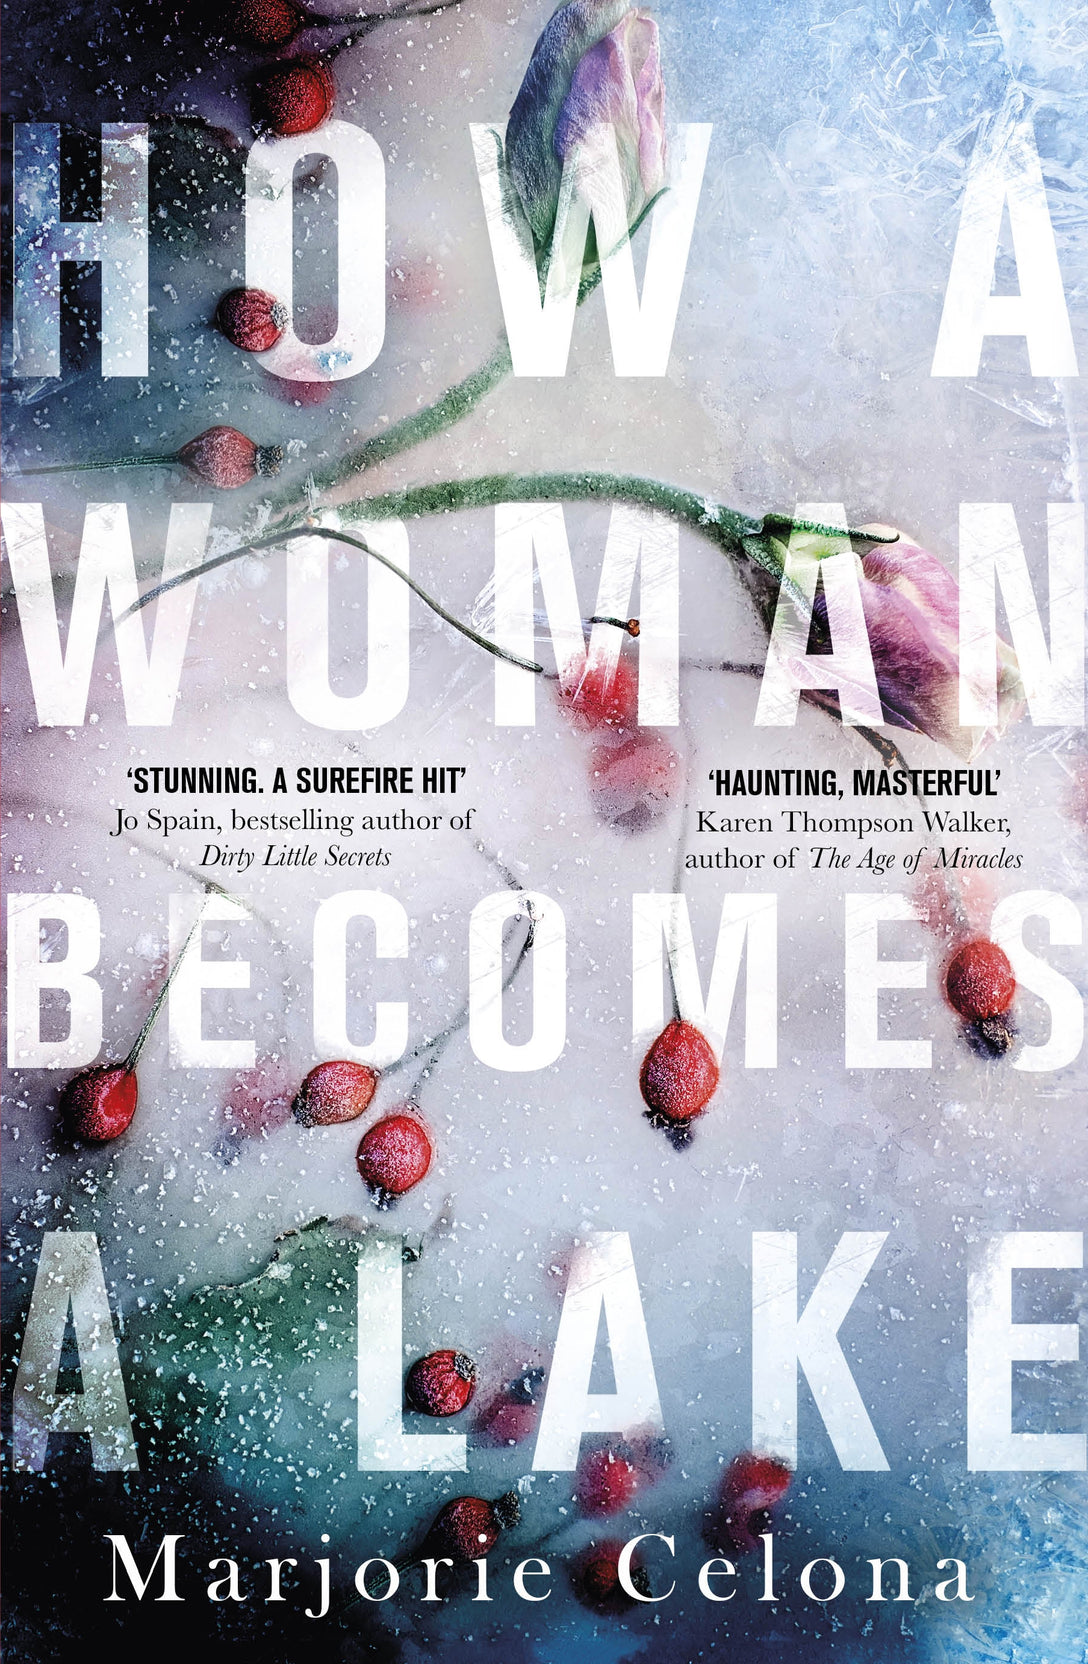 How a Woman Becomes a Lake by Marjorie Celona